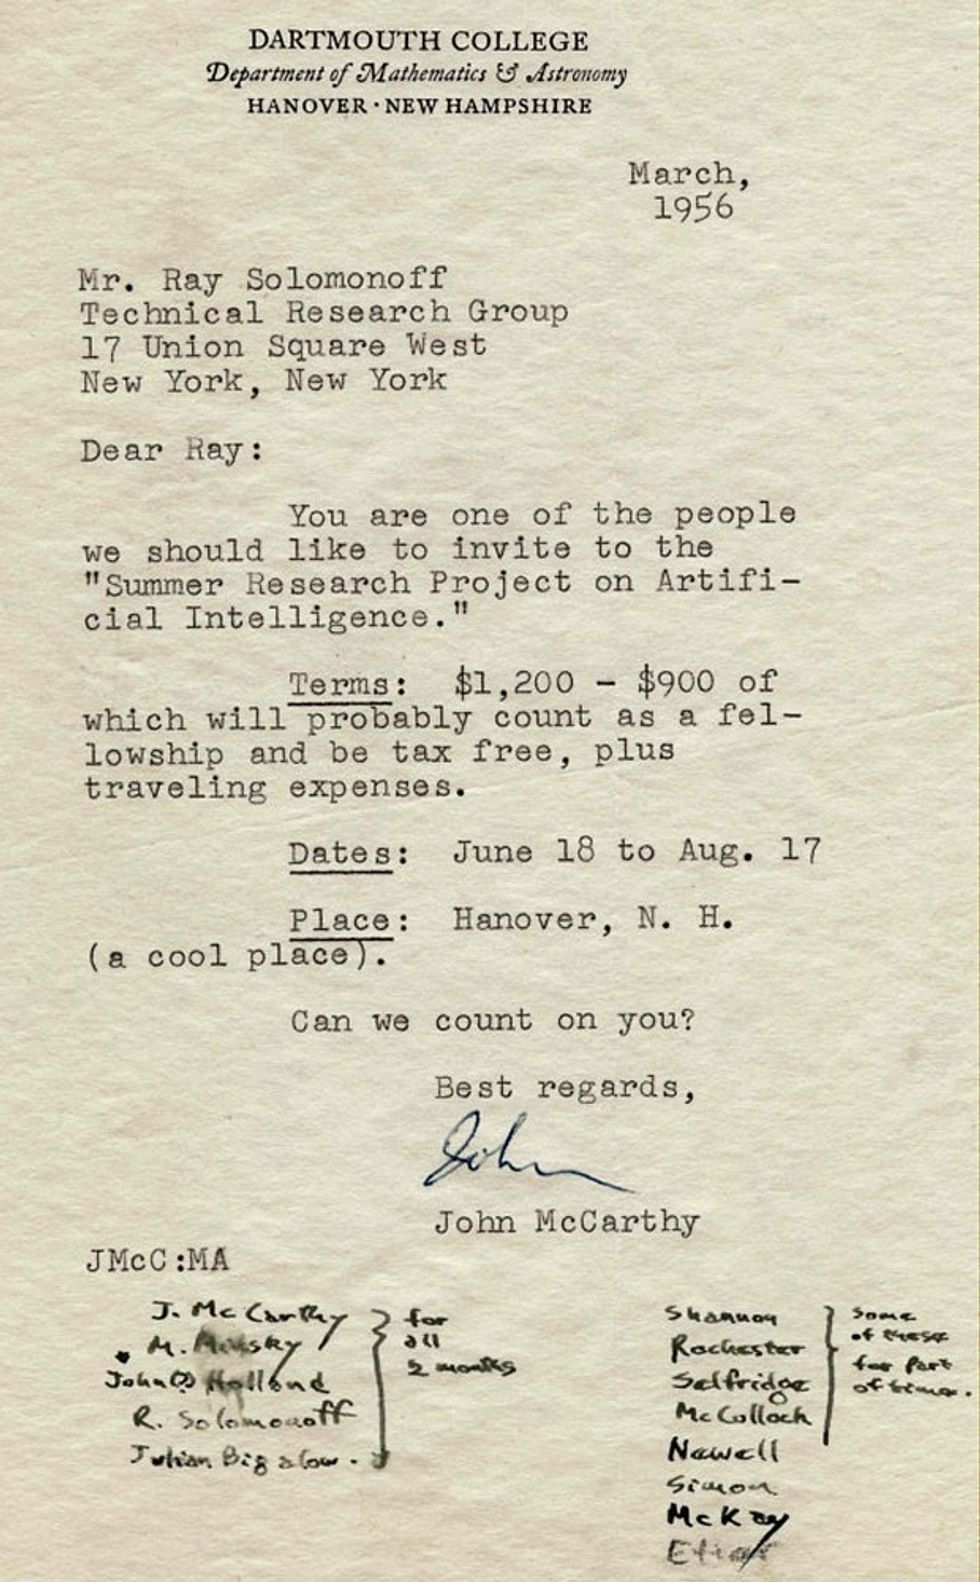 A letter from John McCarthy to Ray Solomonoff on Dartmouth College stationery.